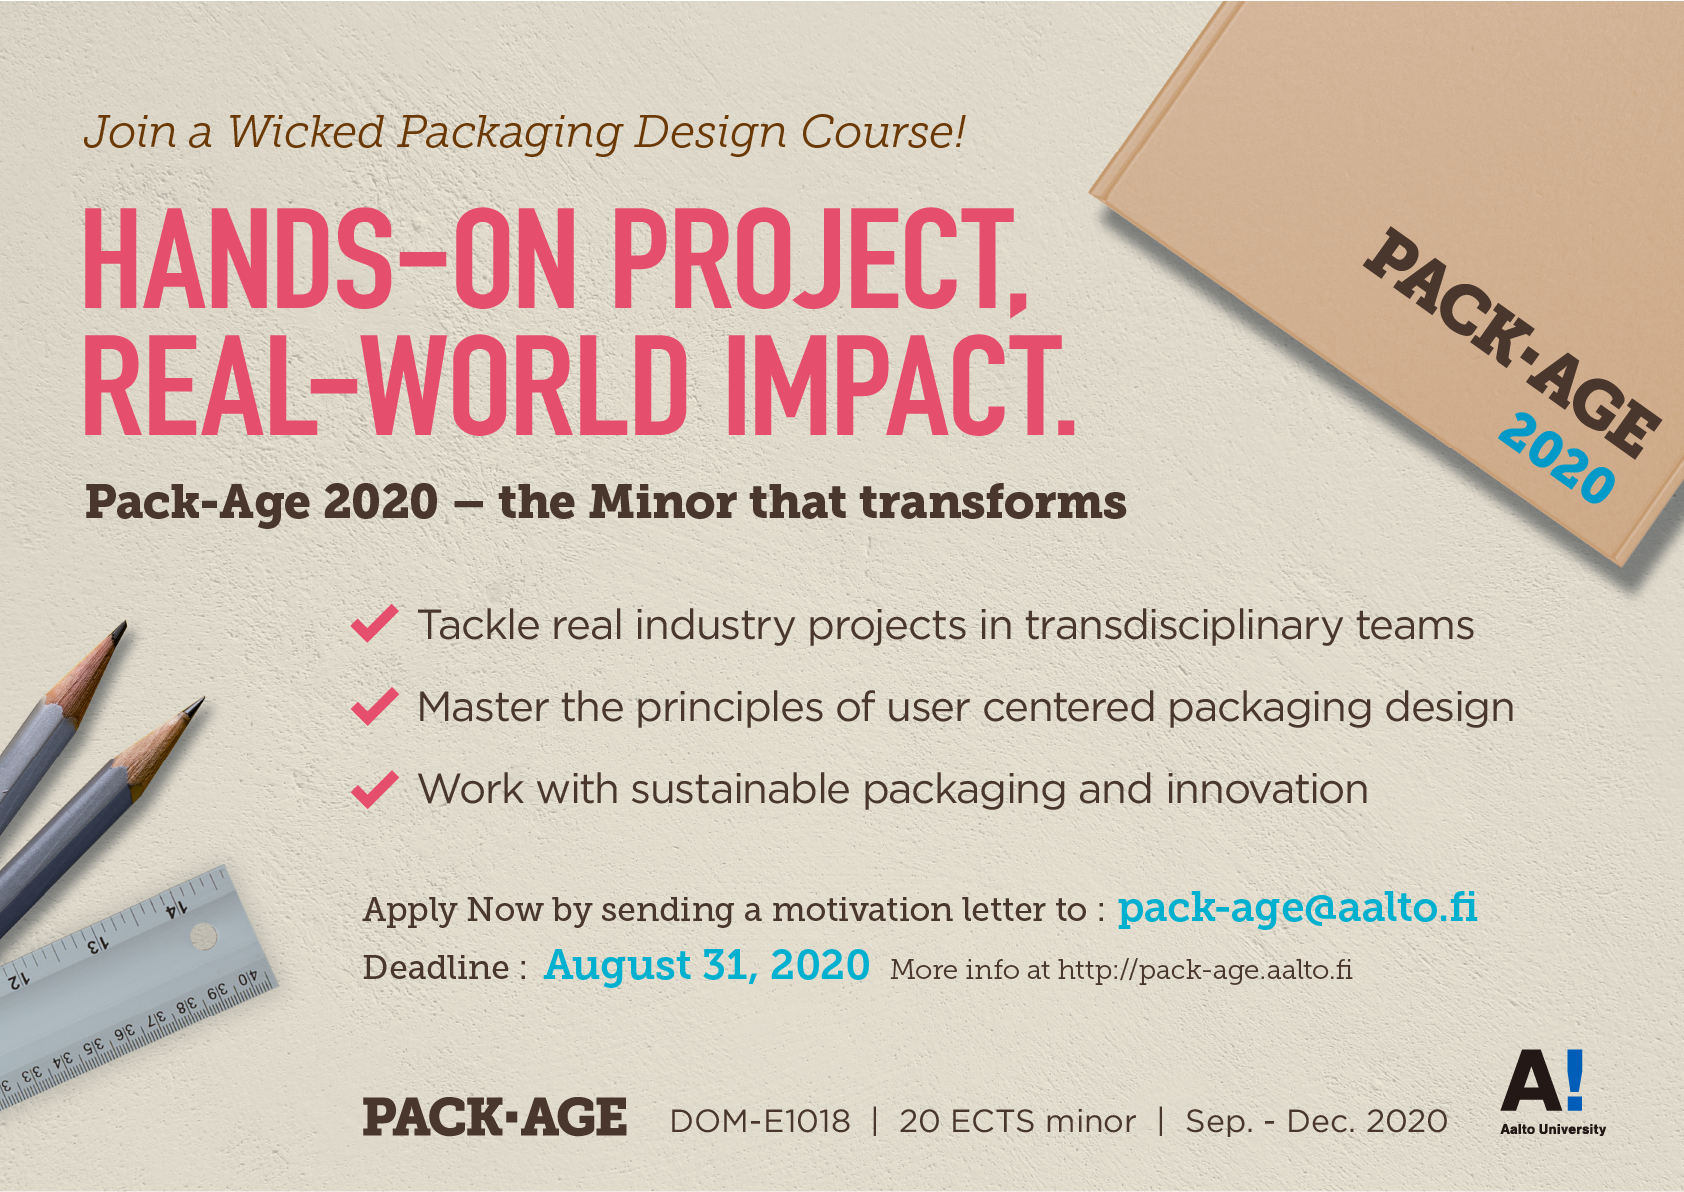 Apply to Pack-Age 2020!